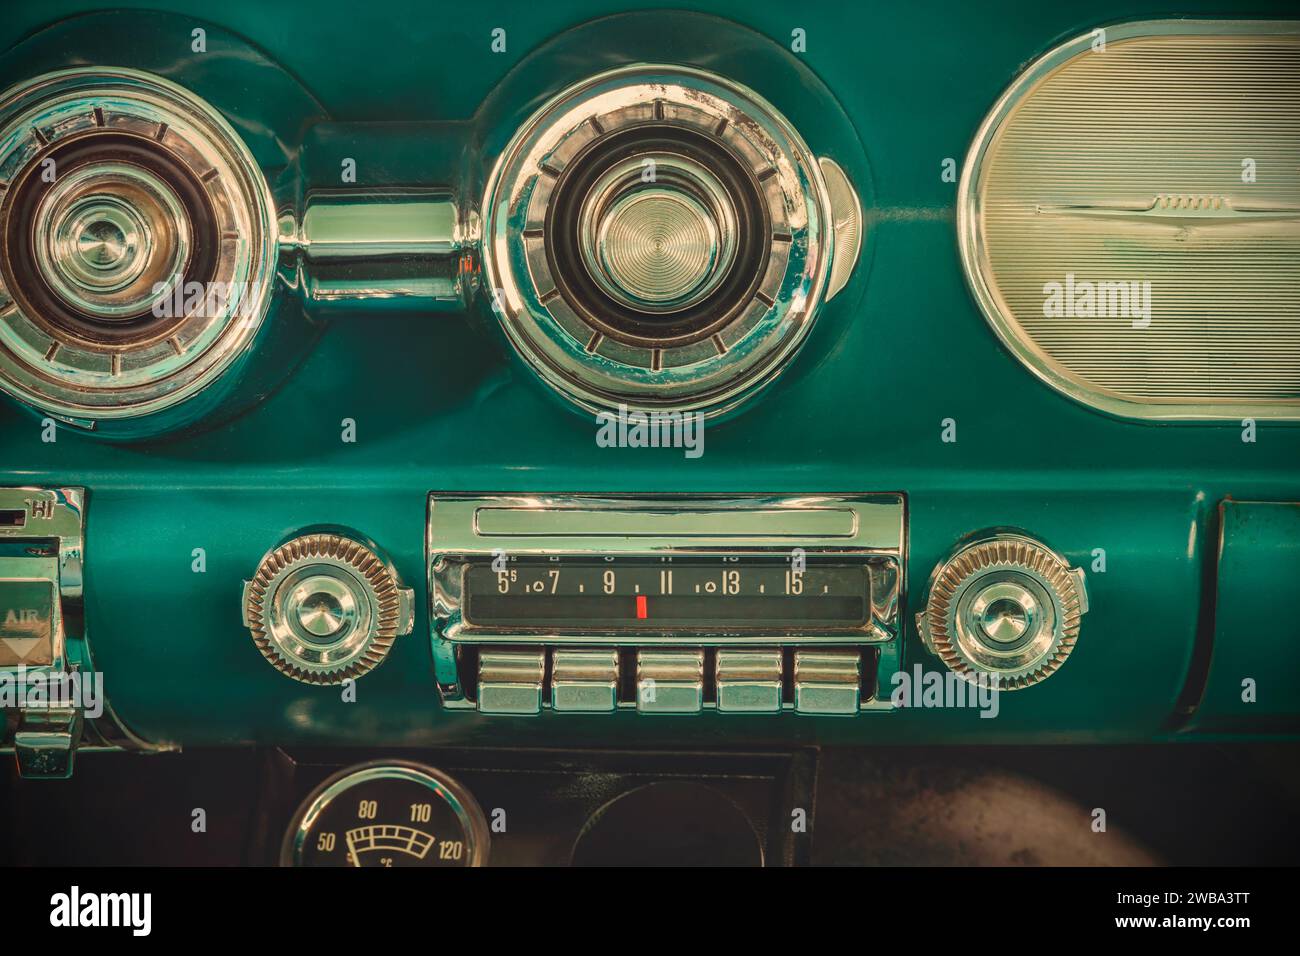 Retro styled image of an old car radio inside a green classic American car Stock Photo